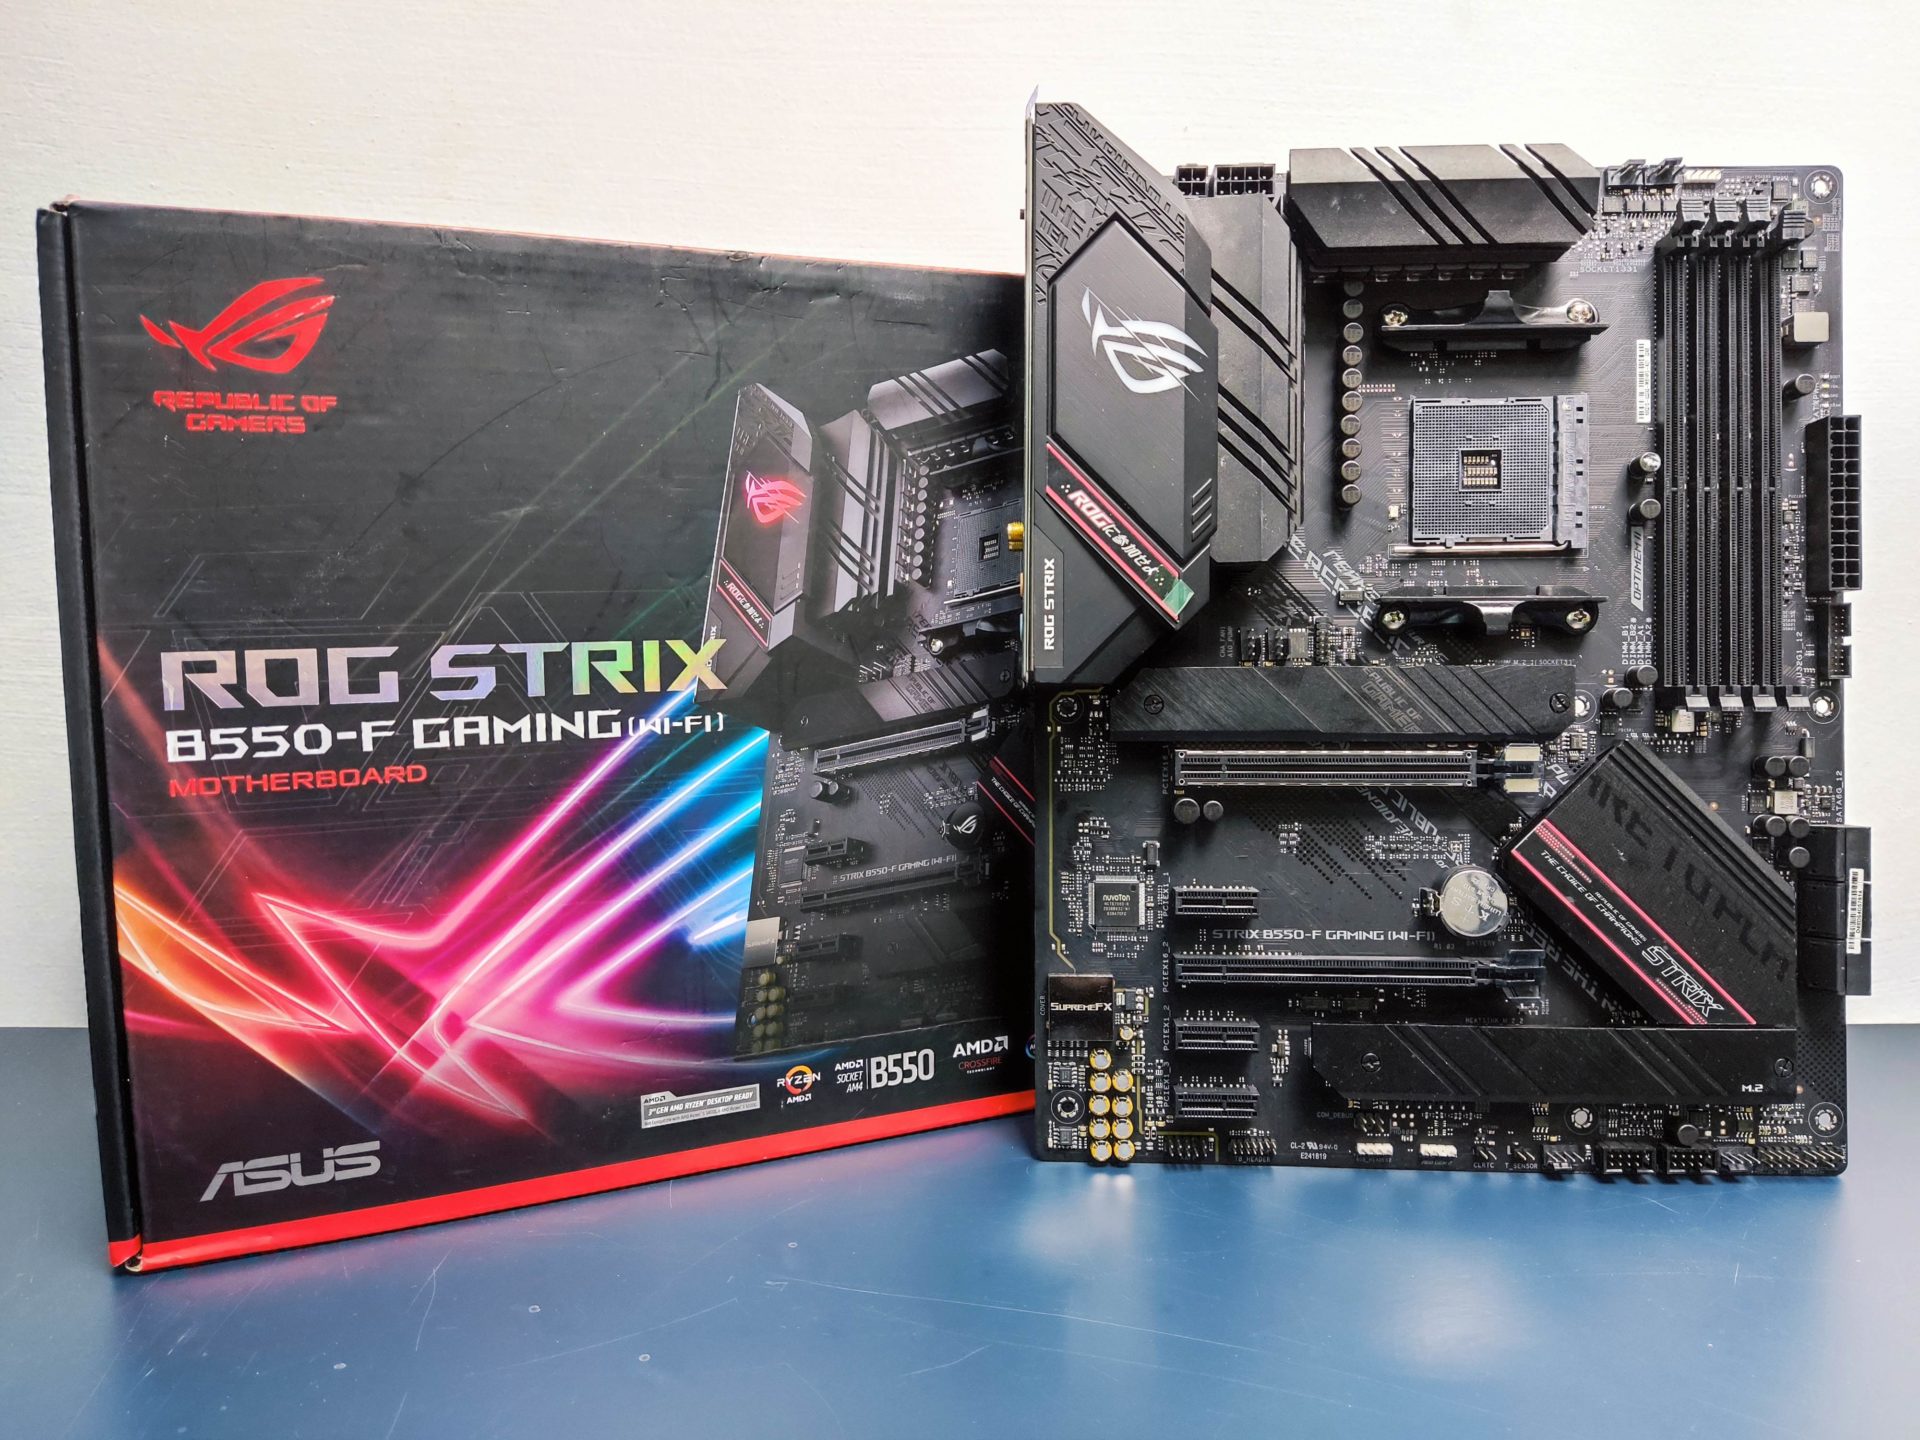 ASUS ROG STRIX B550-F GAMING (WI-FI) Motherboard Review - The Tech